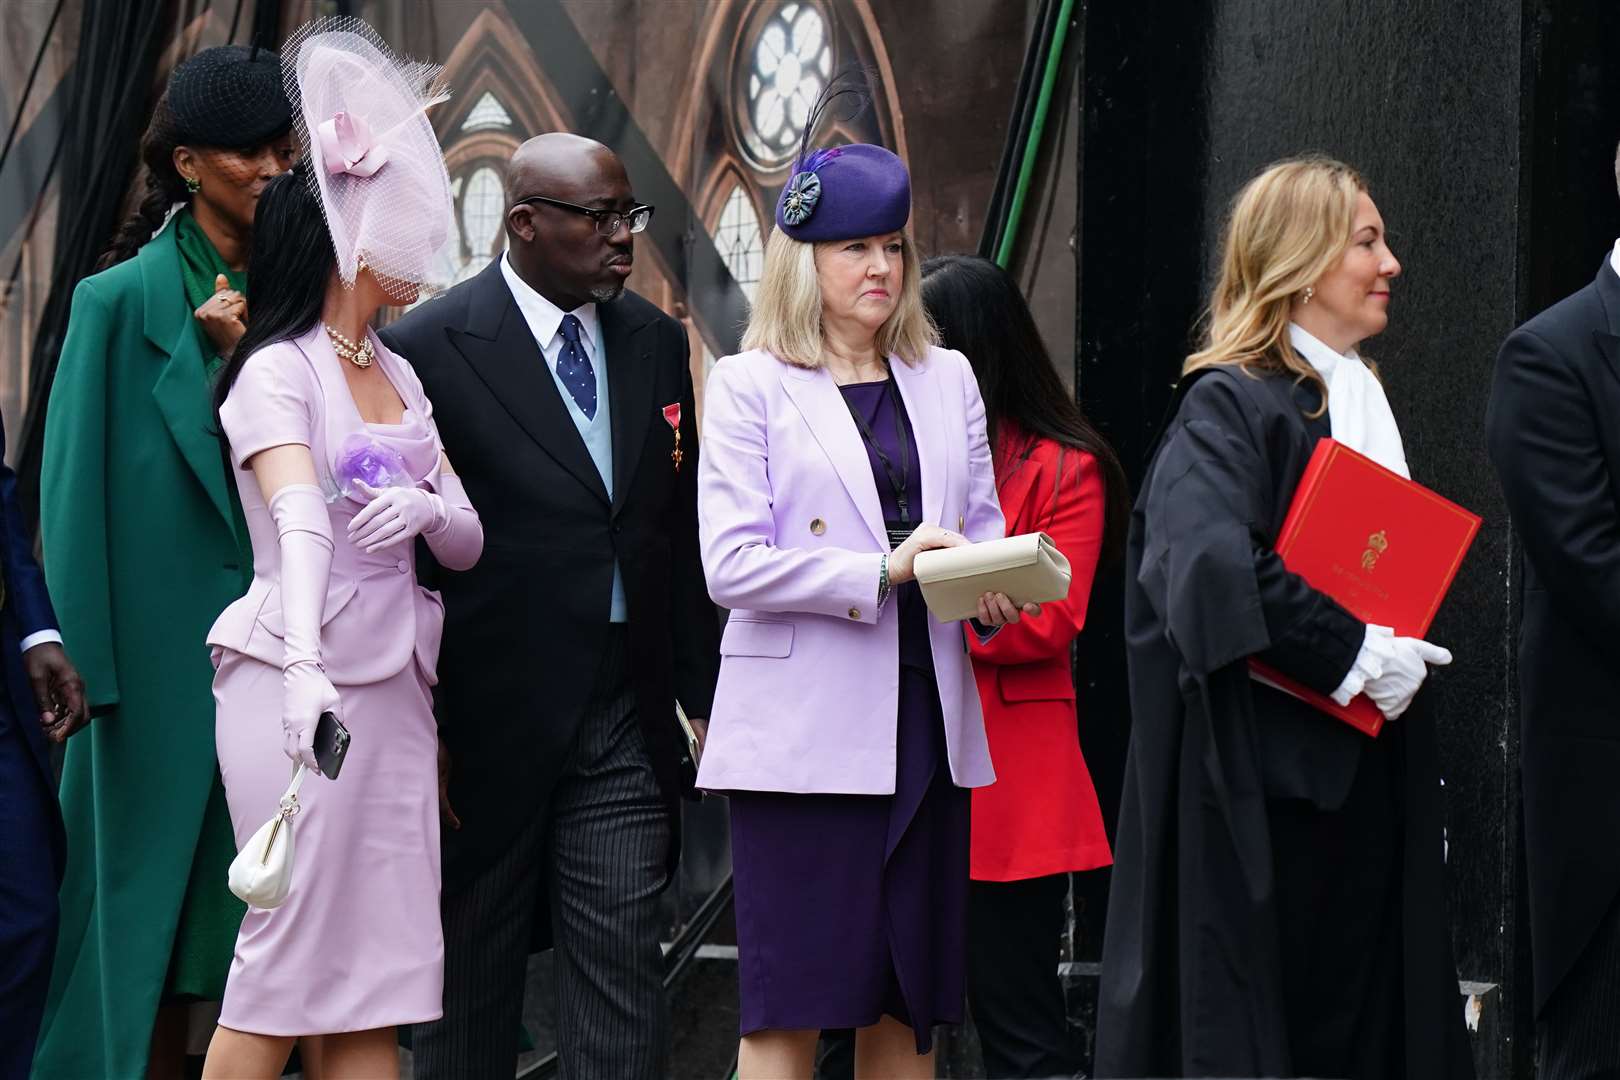 Katy Perry (second from left) and Edward Enninful (third from left) (Jane Barlow/PA)